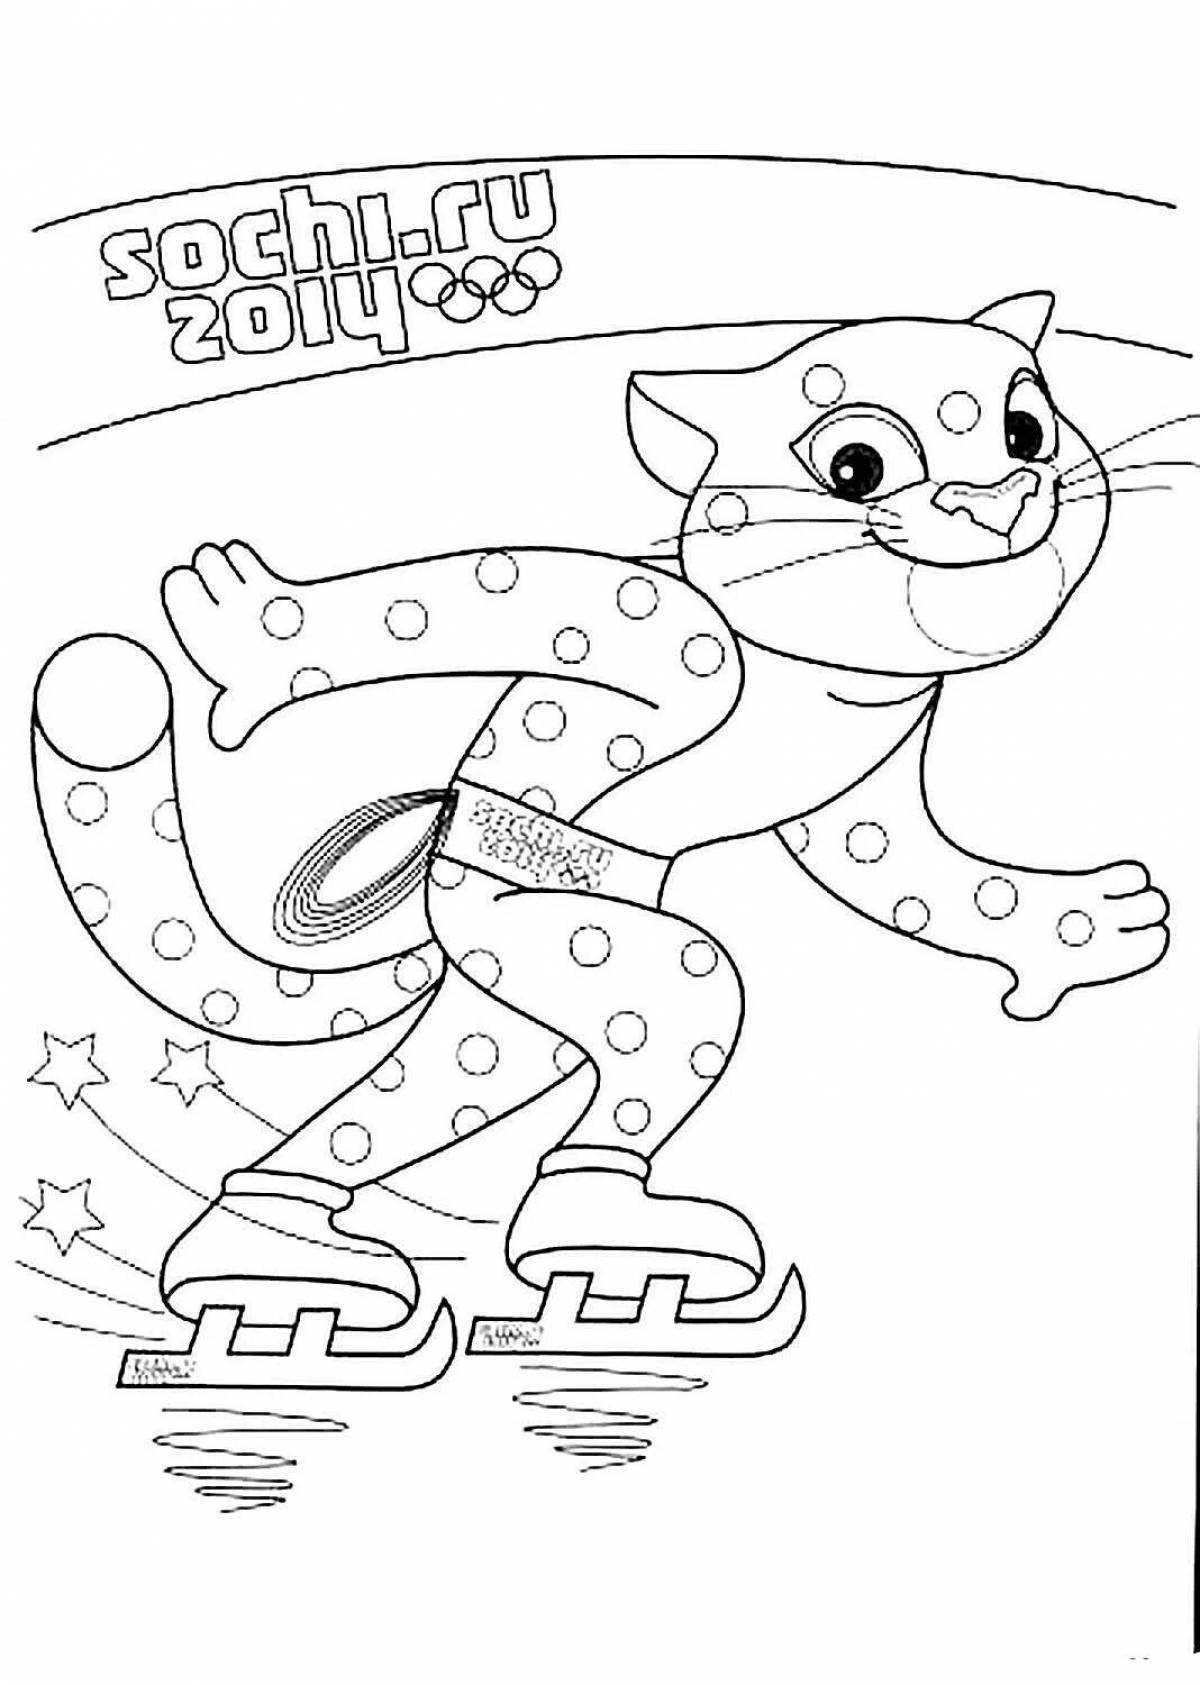 Olympic games coloring book for kids